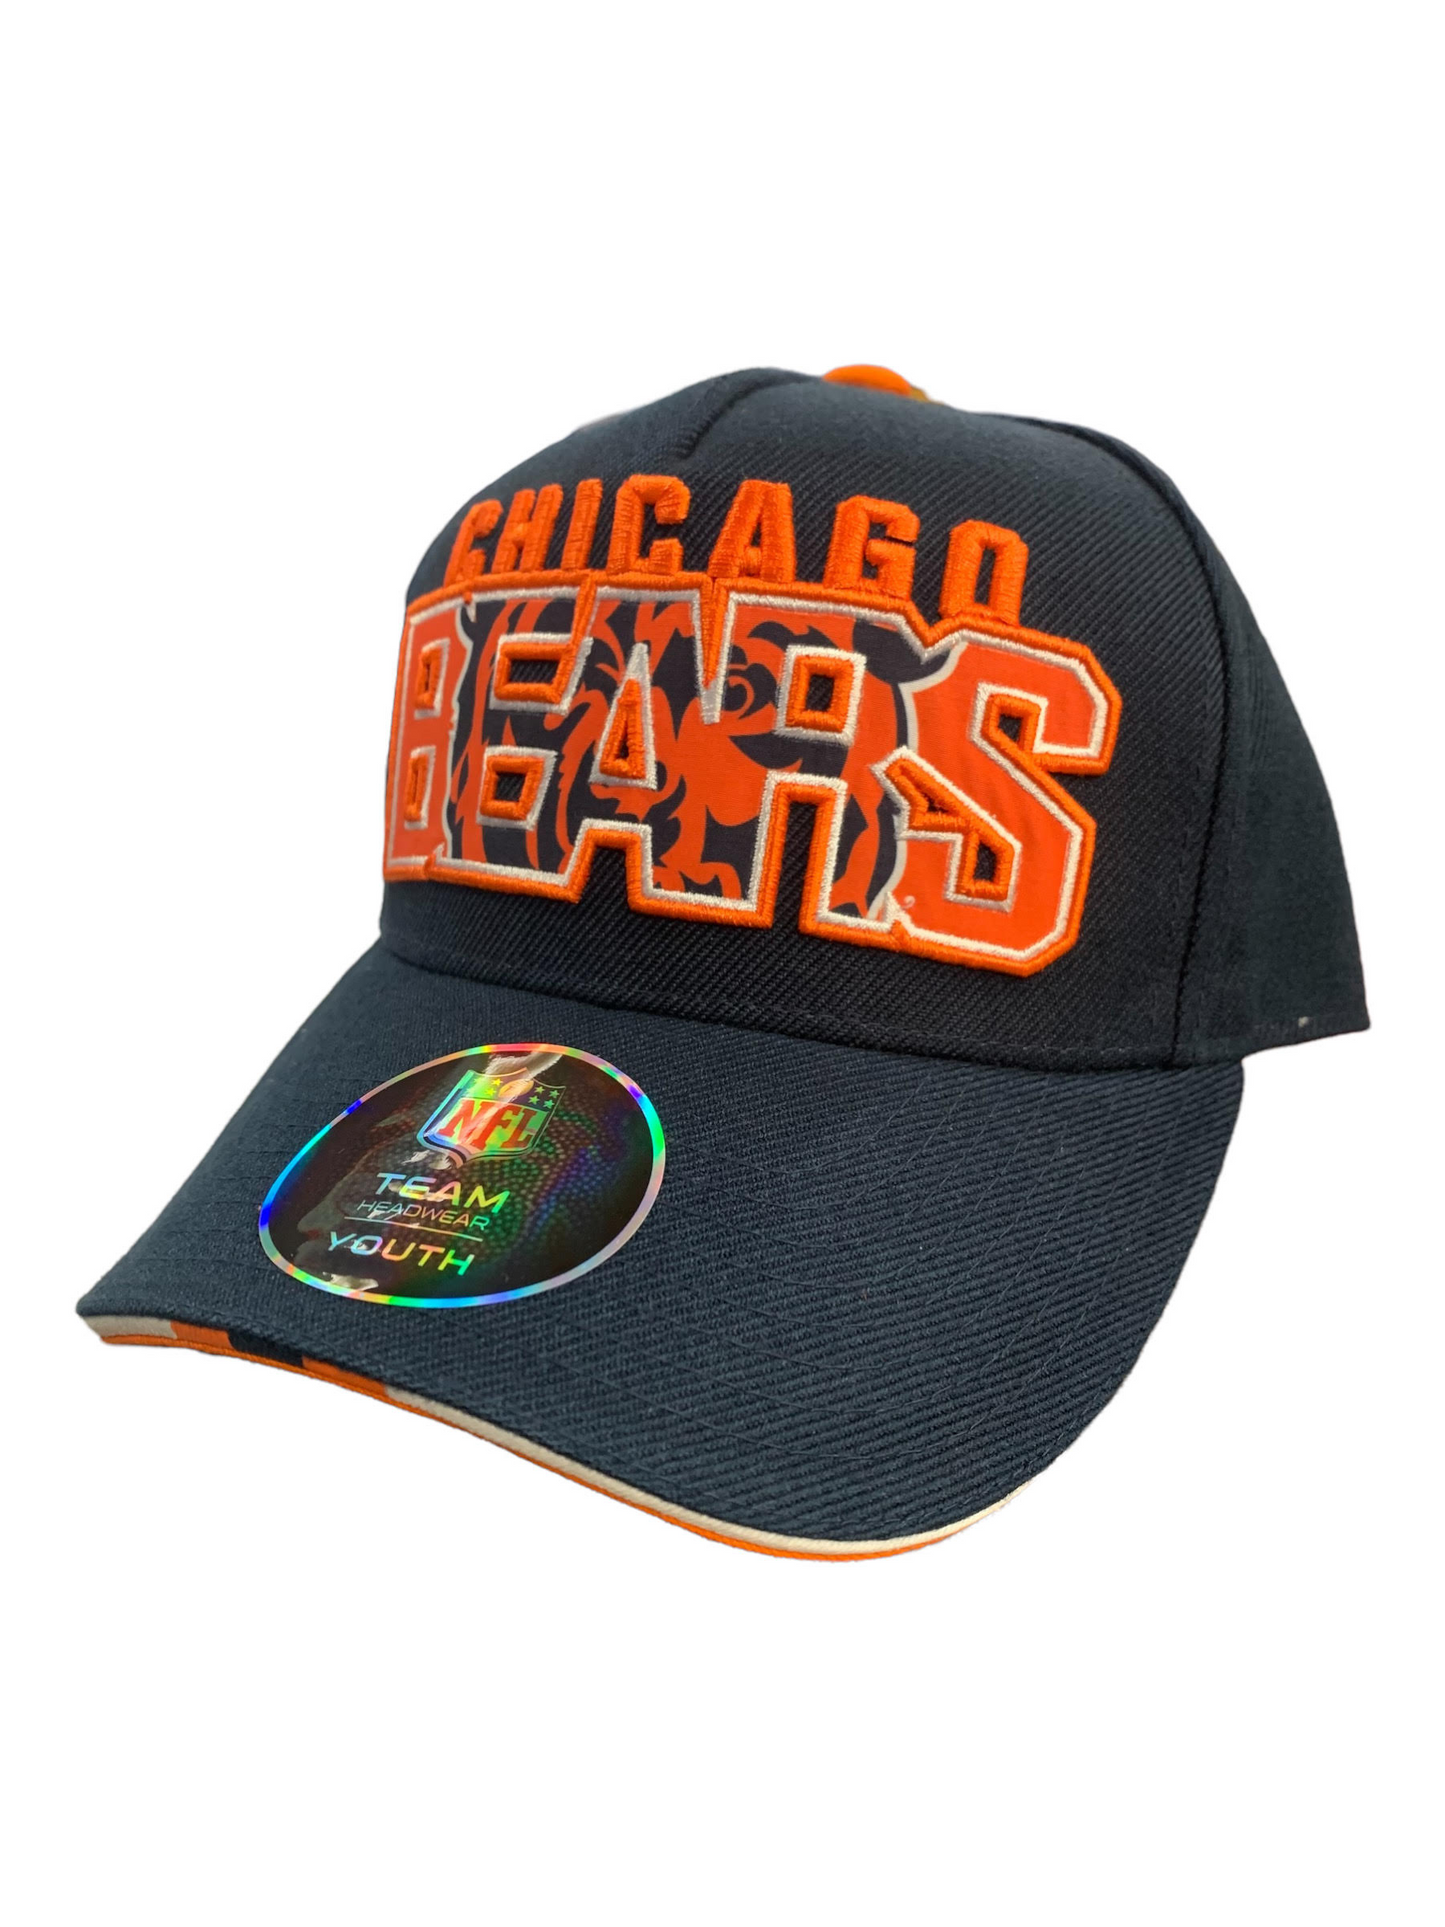 CHICAGO BEARS YOUTH ON TREND PRECURVED SNAPBACK